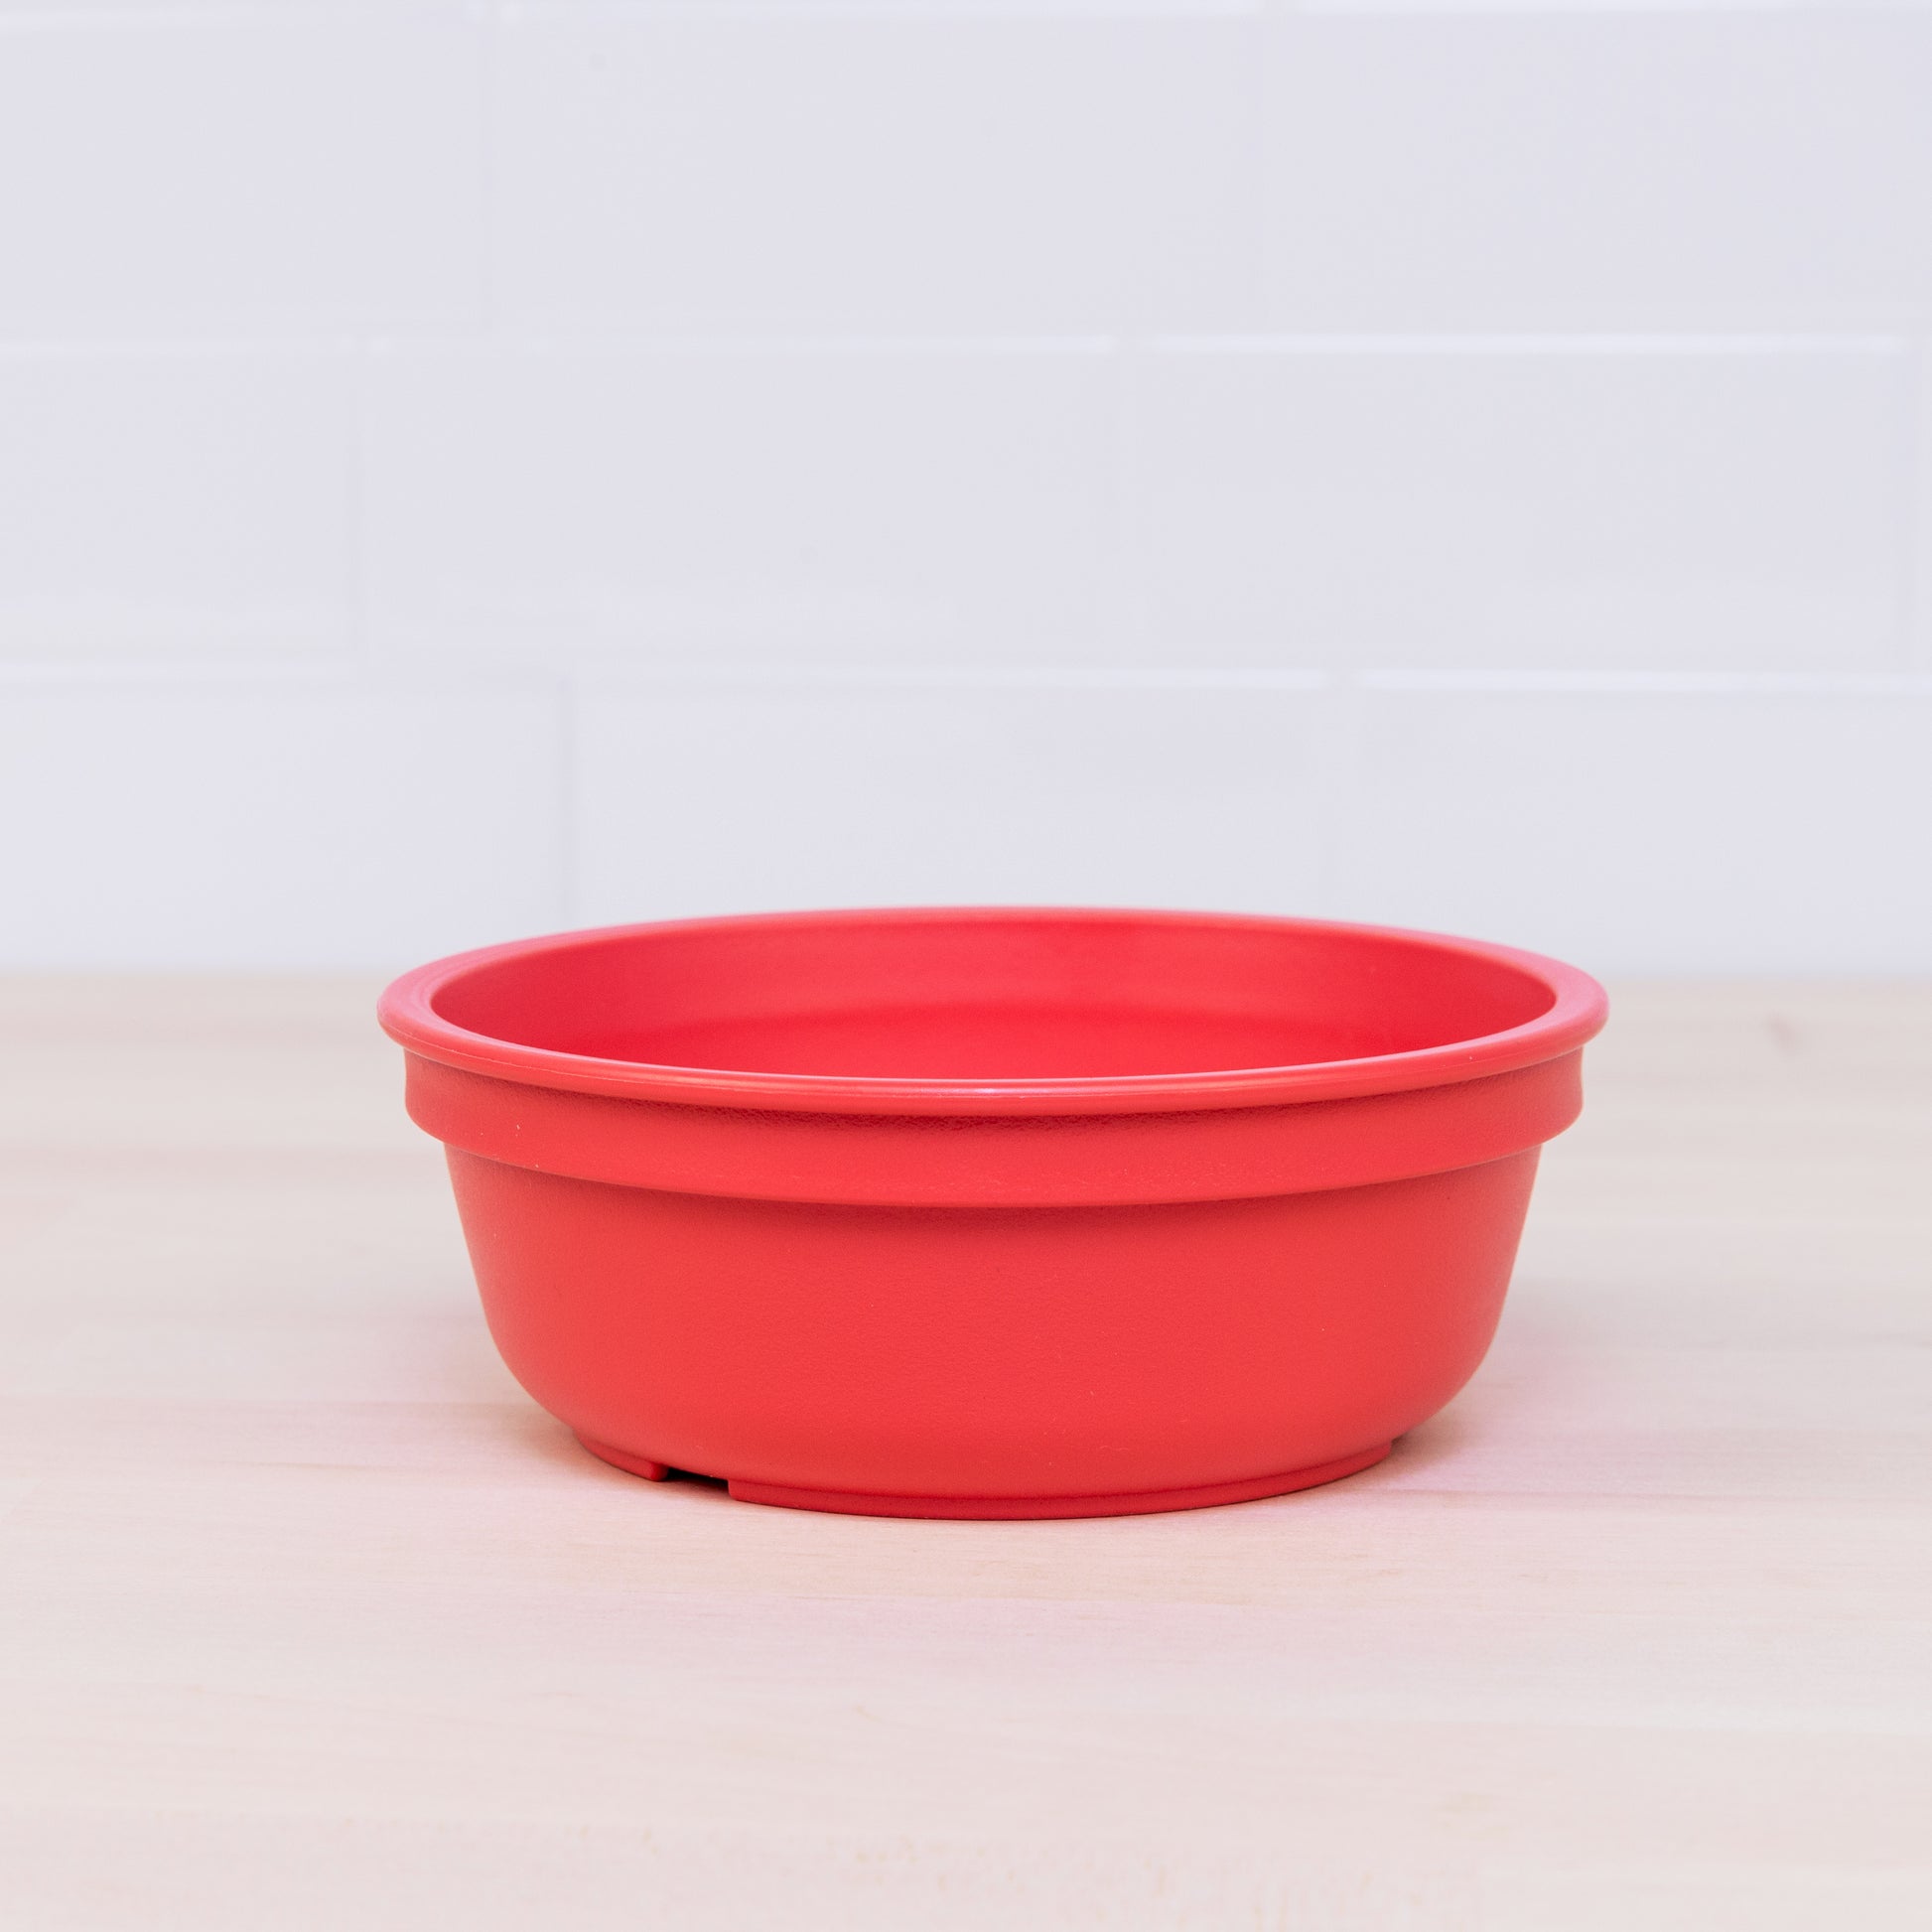 Re-Play Bowl | Standard Size in Red from Bear & Moo